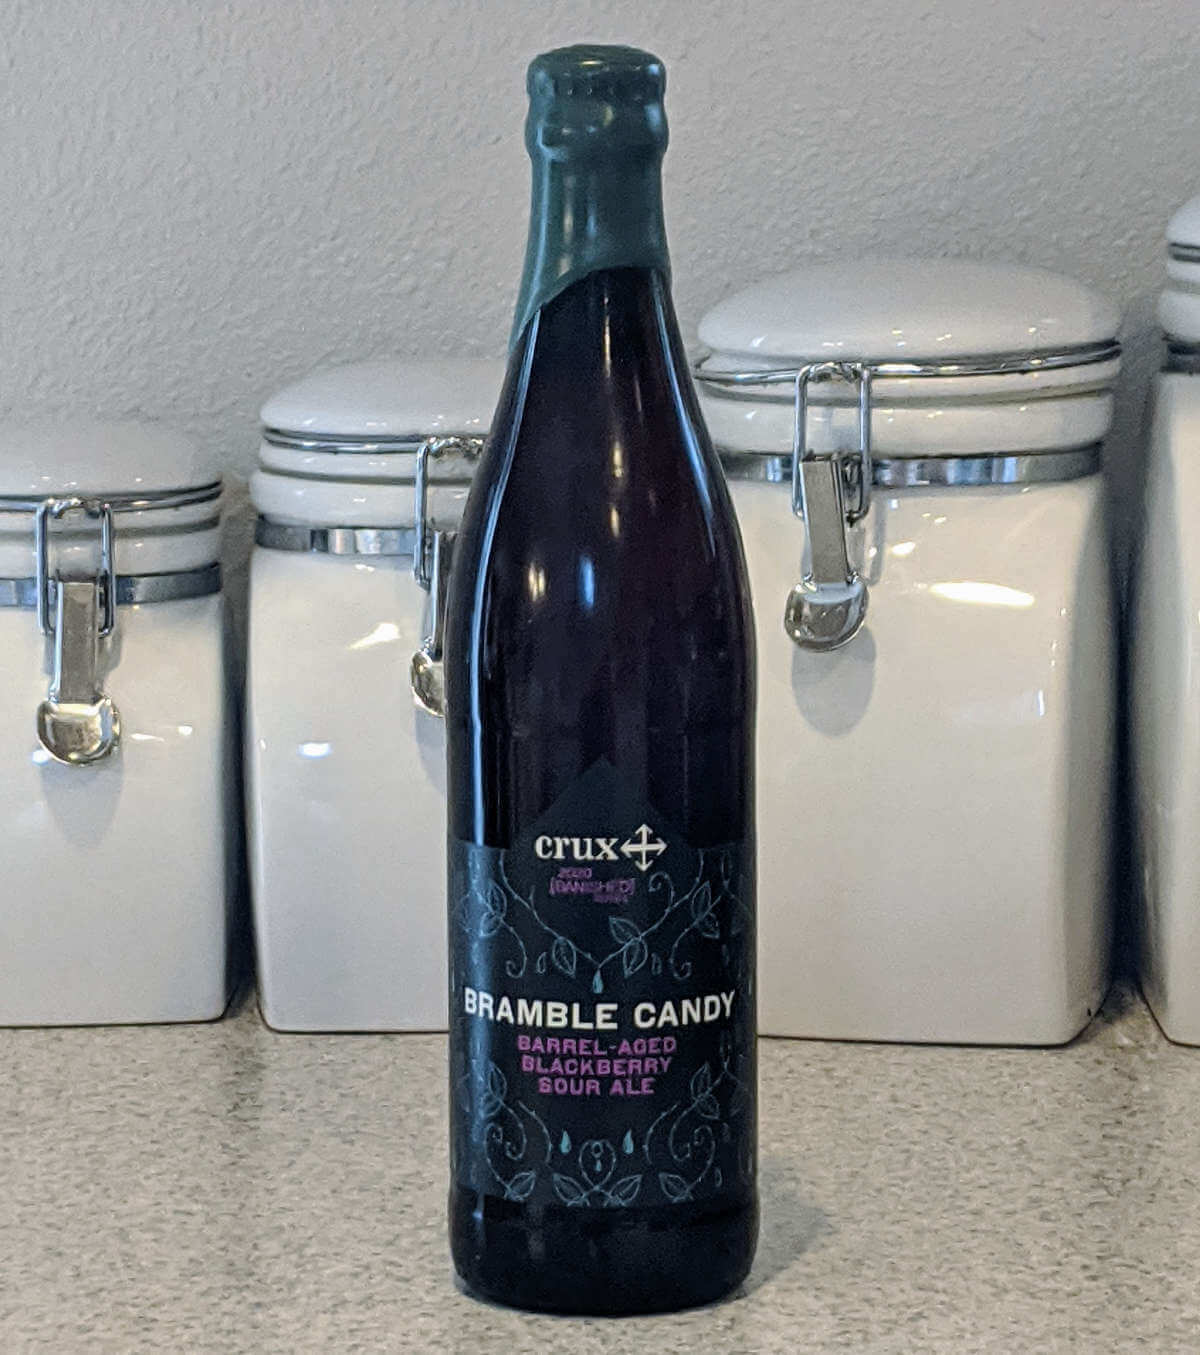 Received: Crux Fermentation Project Bramble Candy